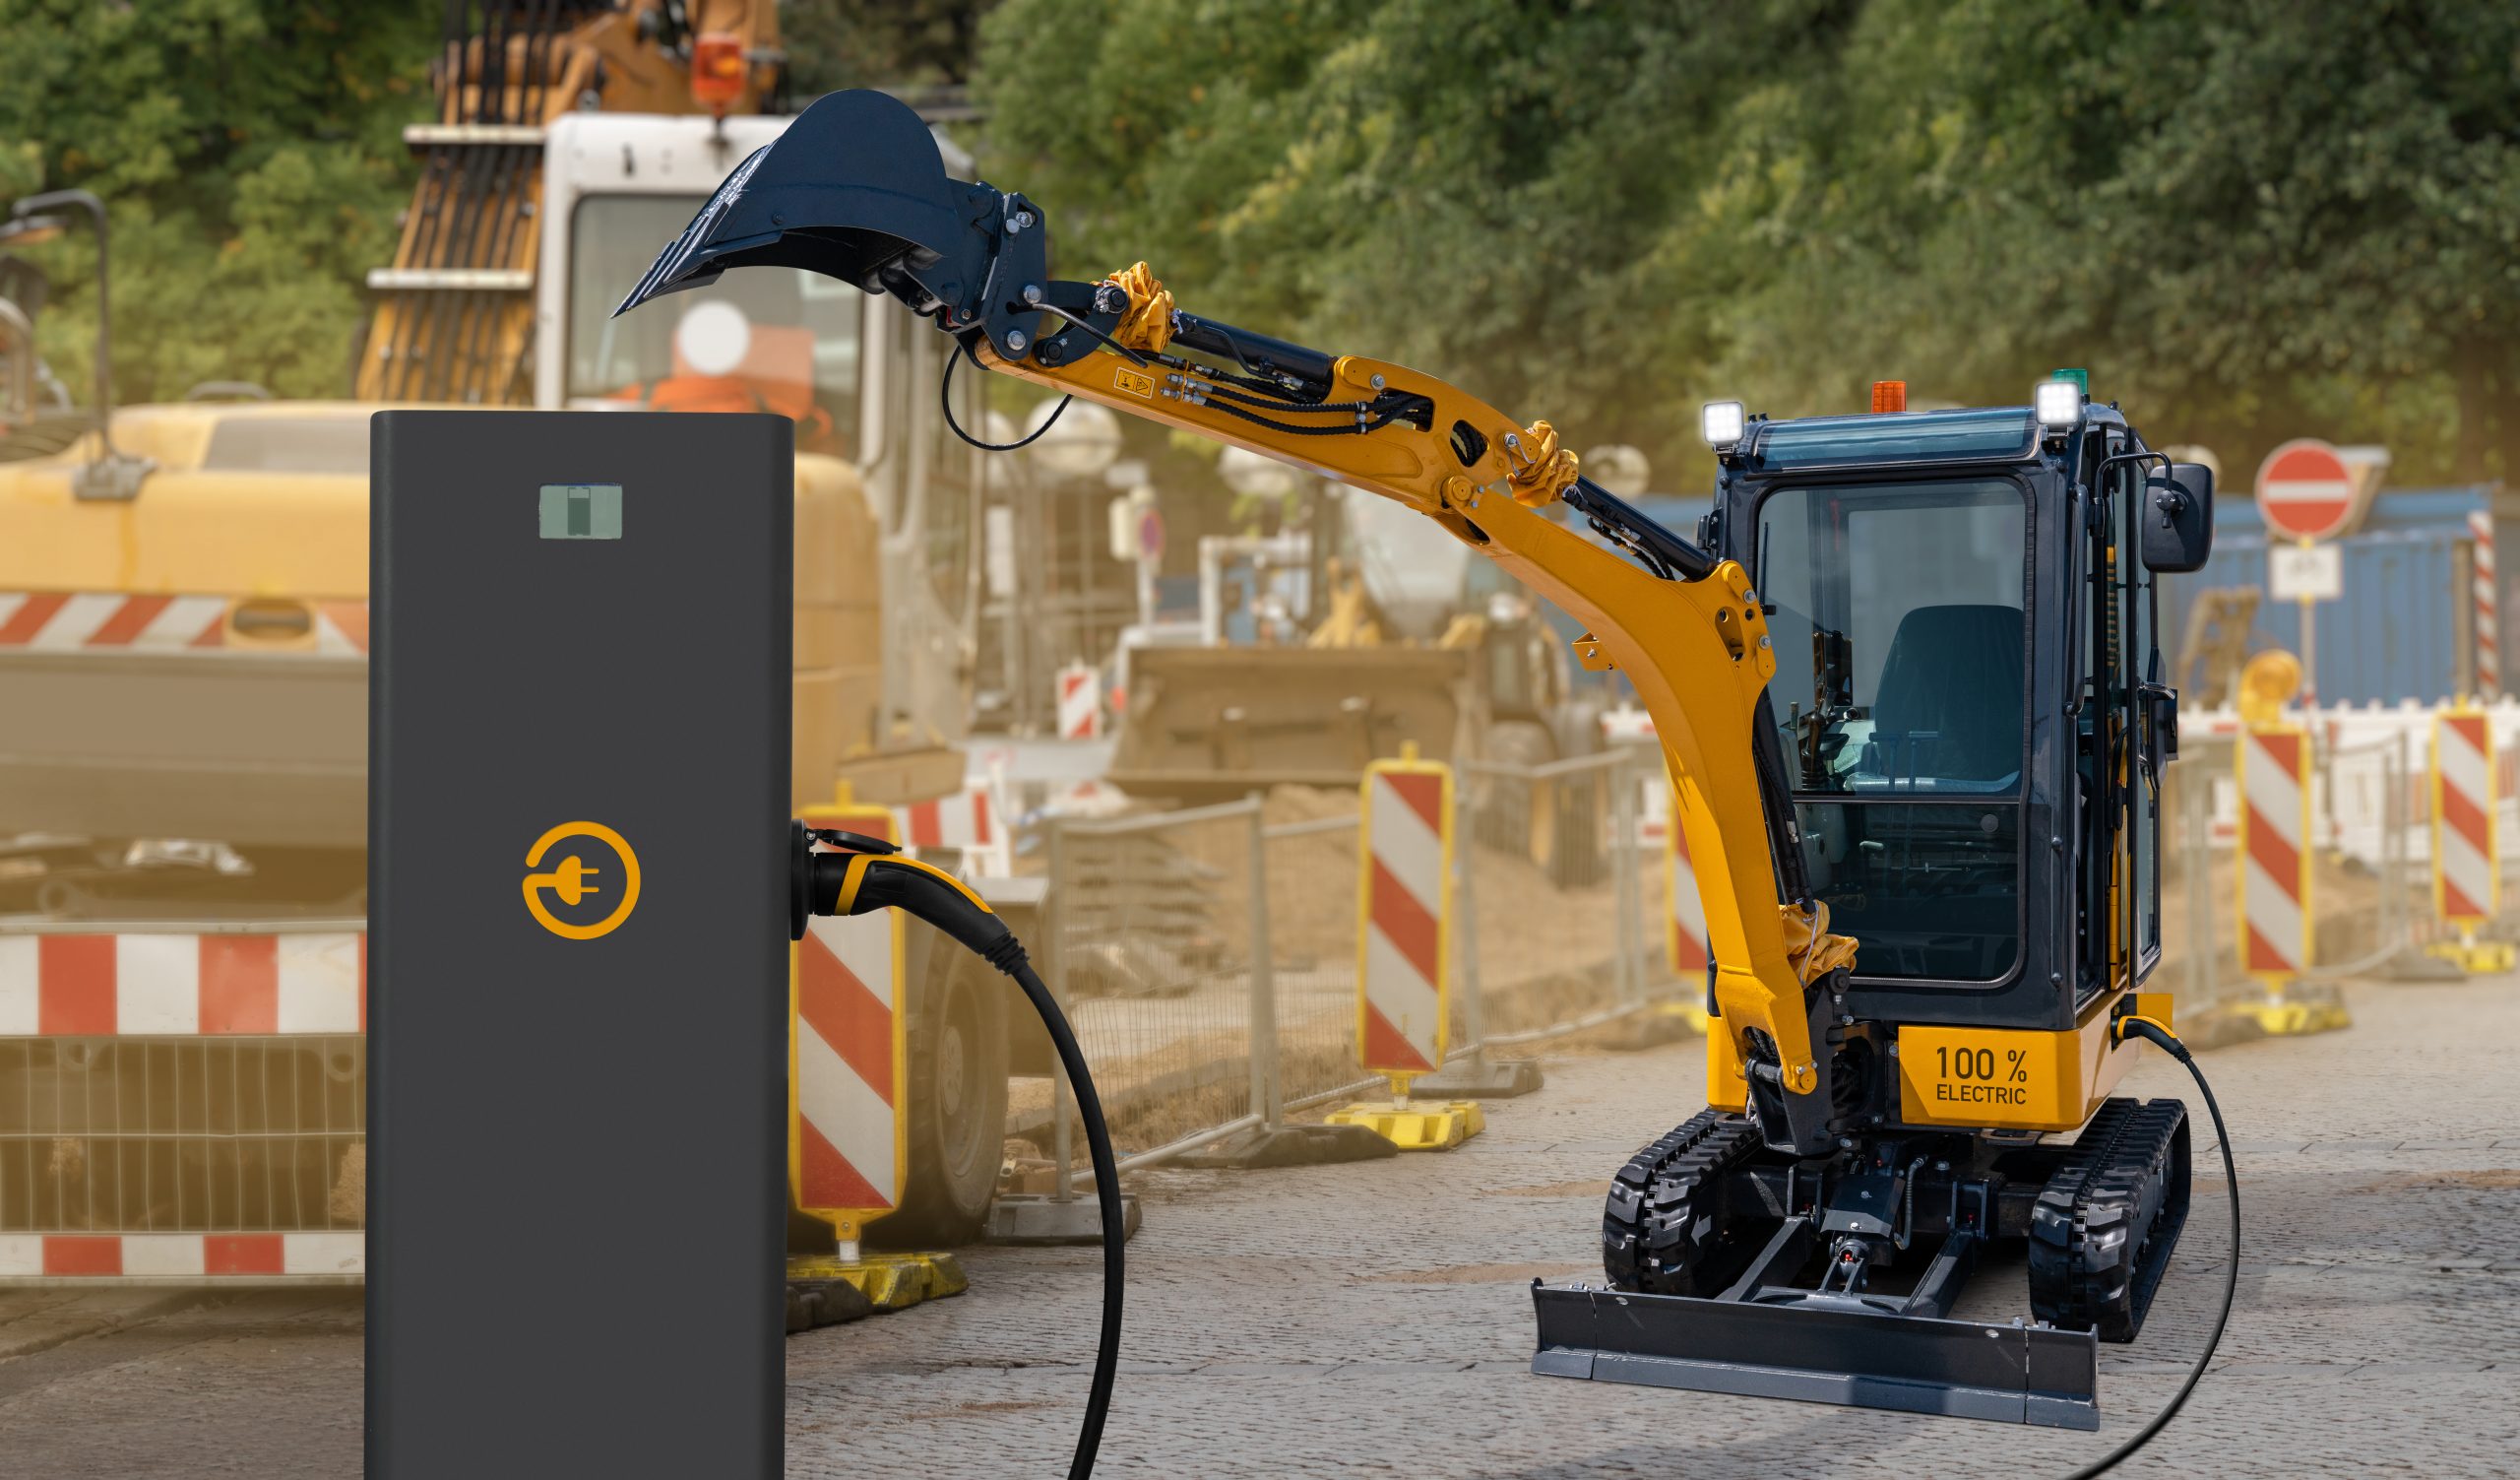 Feature Article: Advanced Charging Technologies for Non-Road Mobile Machinery